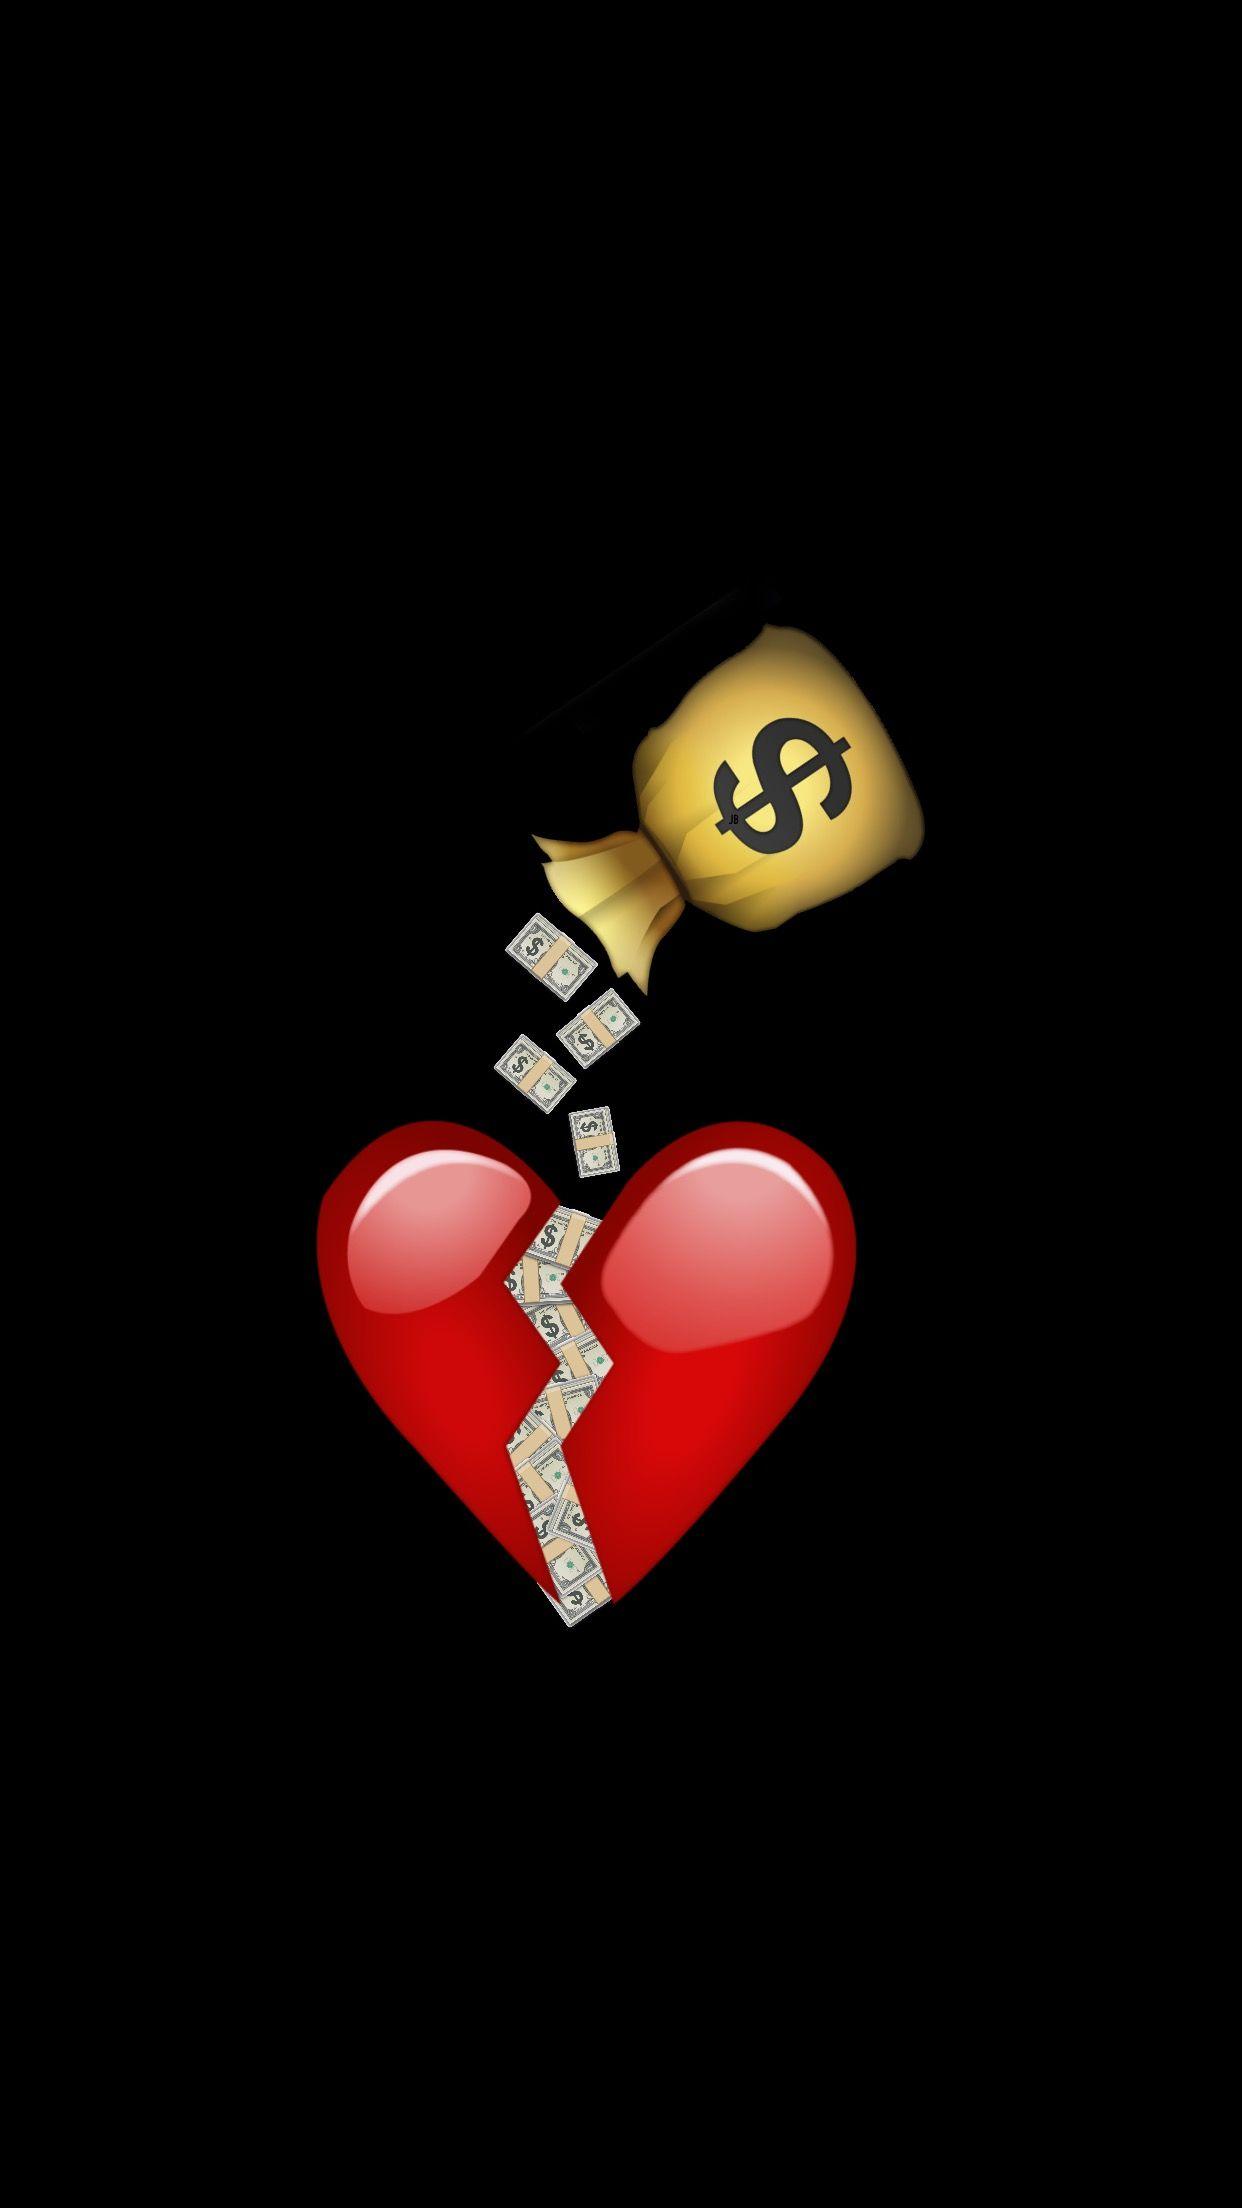 Put A Band Aid On A Broken Heart Heart IPhone Wallpaper & Background Download